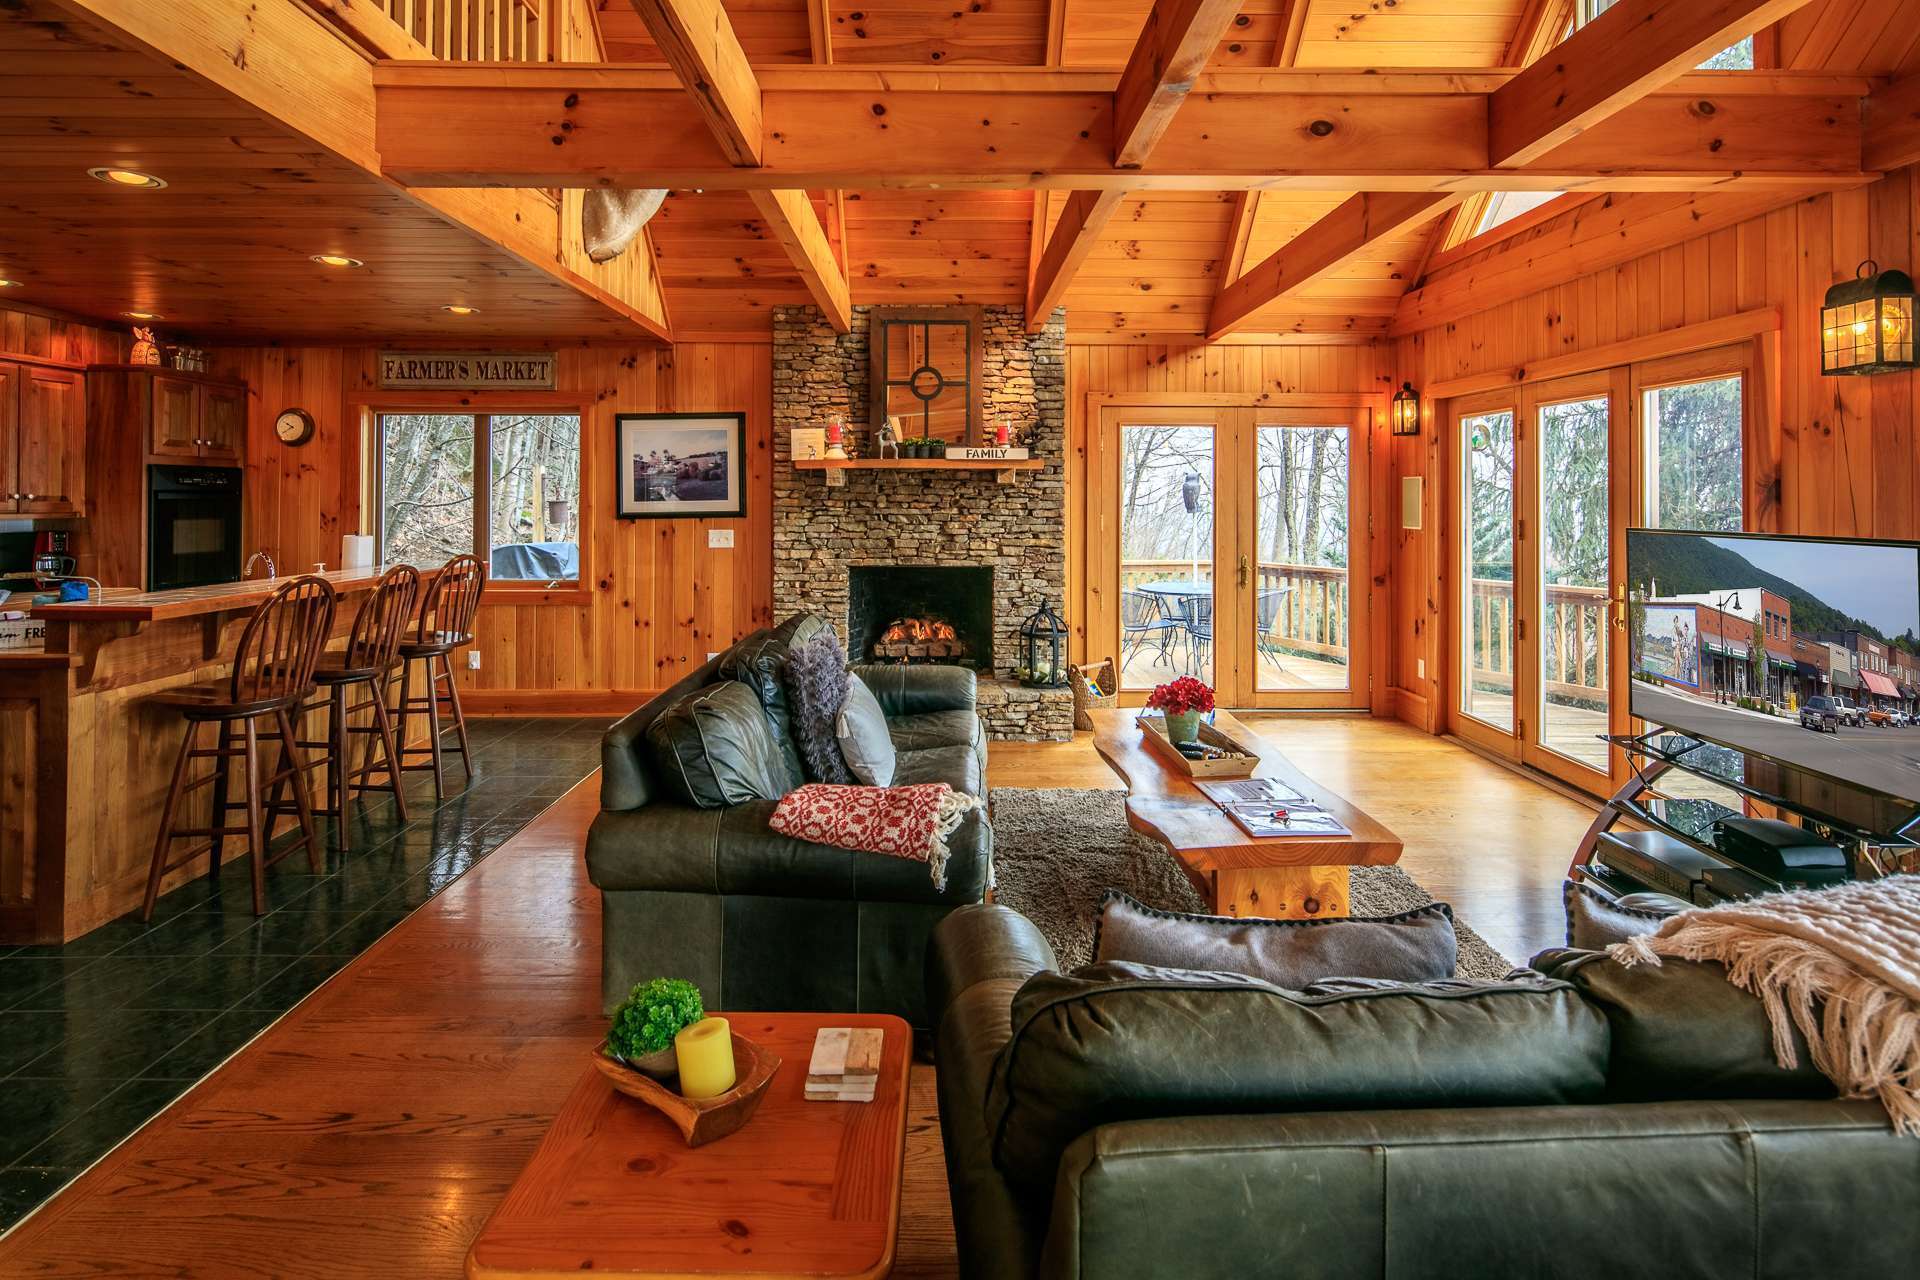 The hub of the home is found in the large vaulted great room with  stone fireplace and a wall of windows filling the room with natural light and allowing you to enjoy breathtaking views through all four seasons in the NC Mountains.